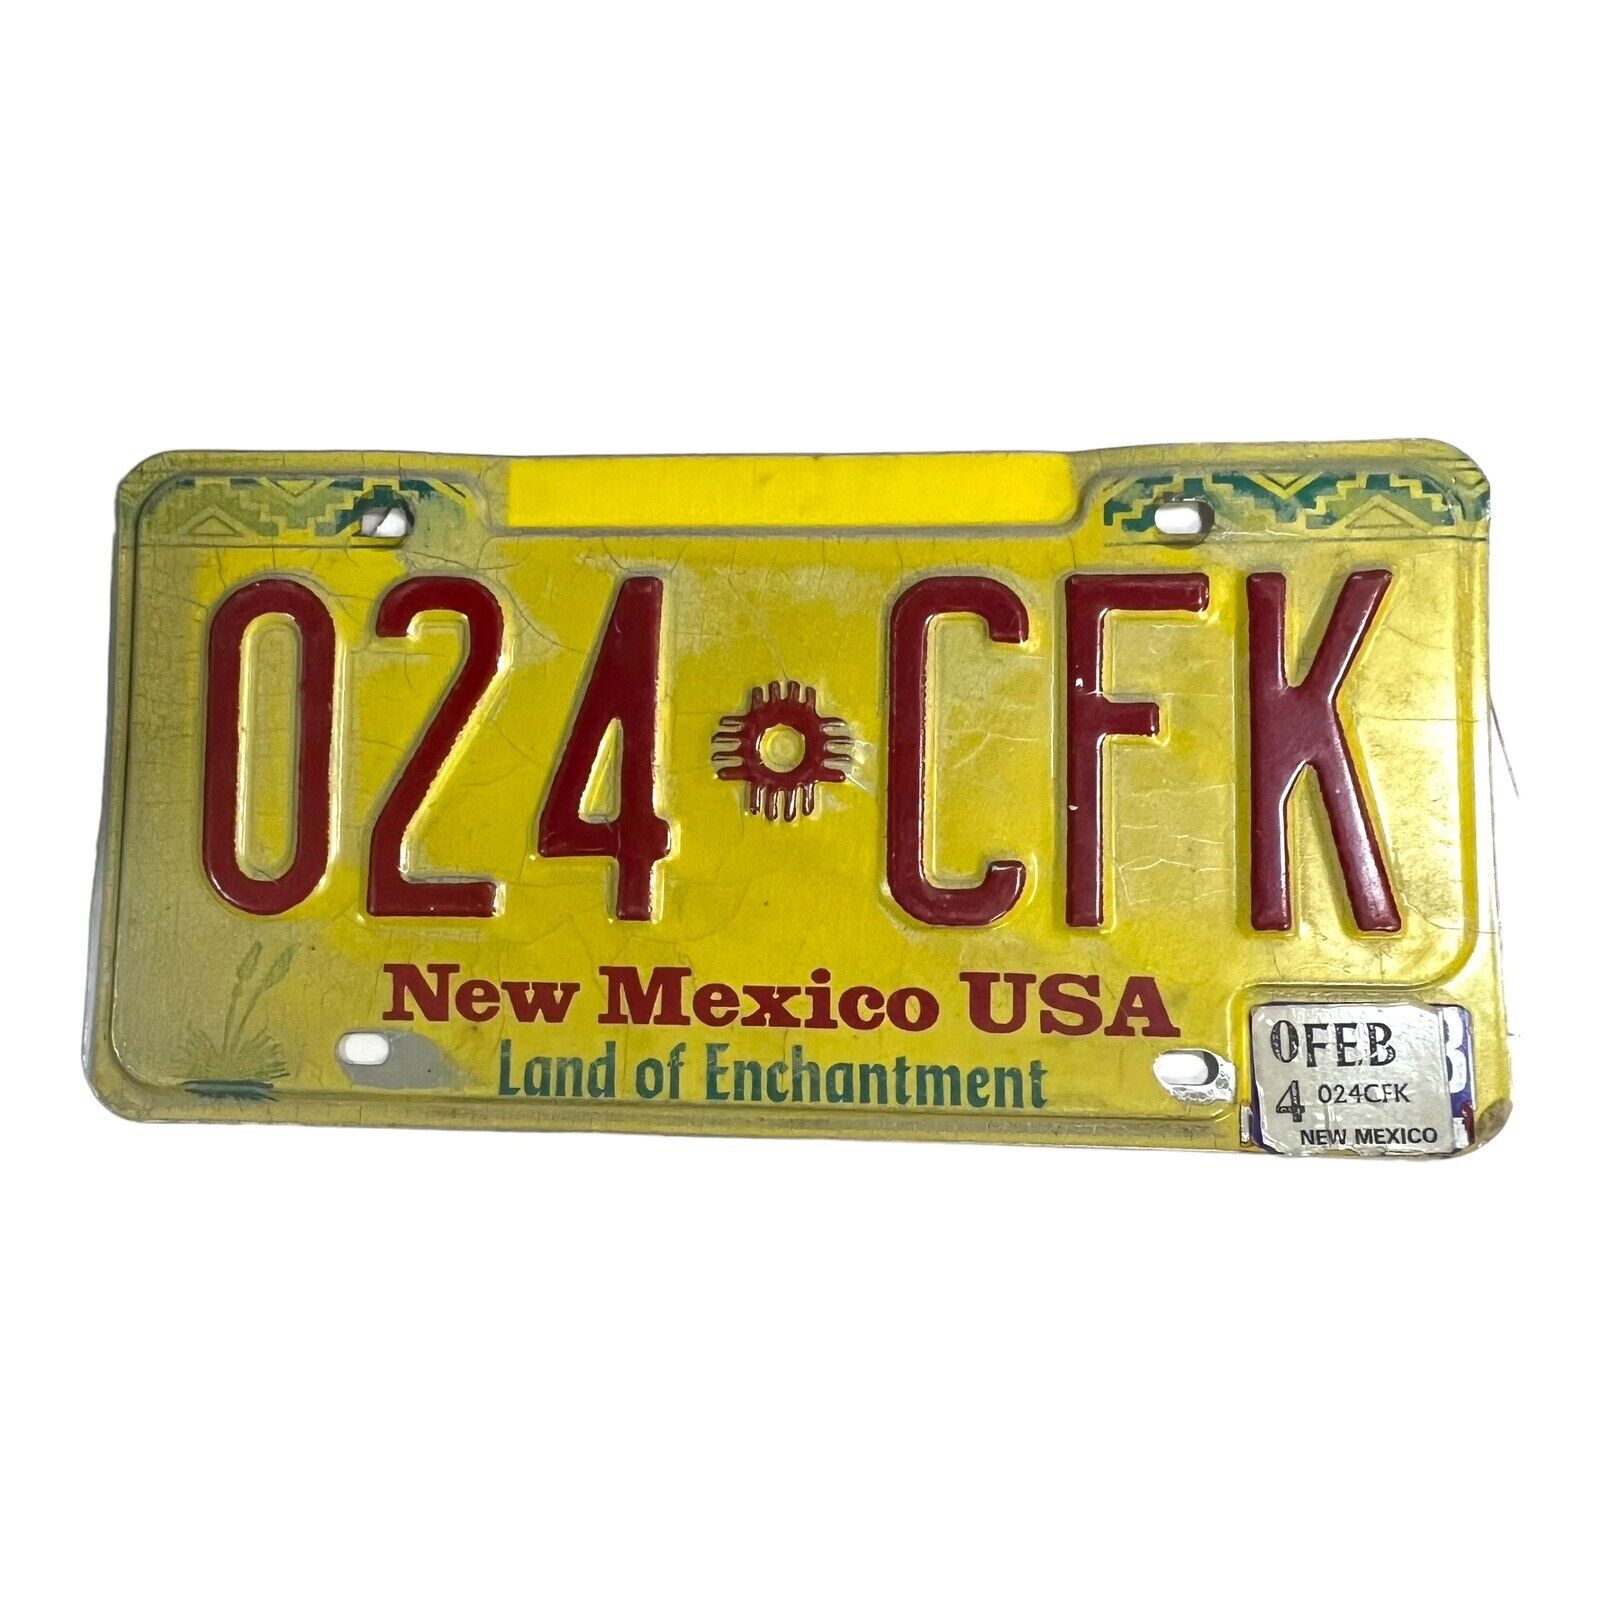 New Mexico USA Land Of Enchantment 024 CFK Auto License Plate Feb 04 Vintage